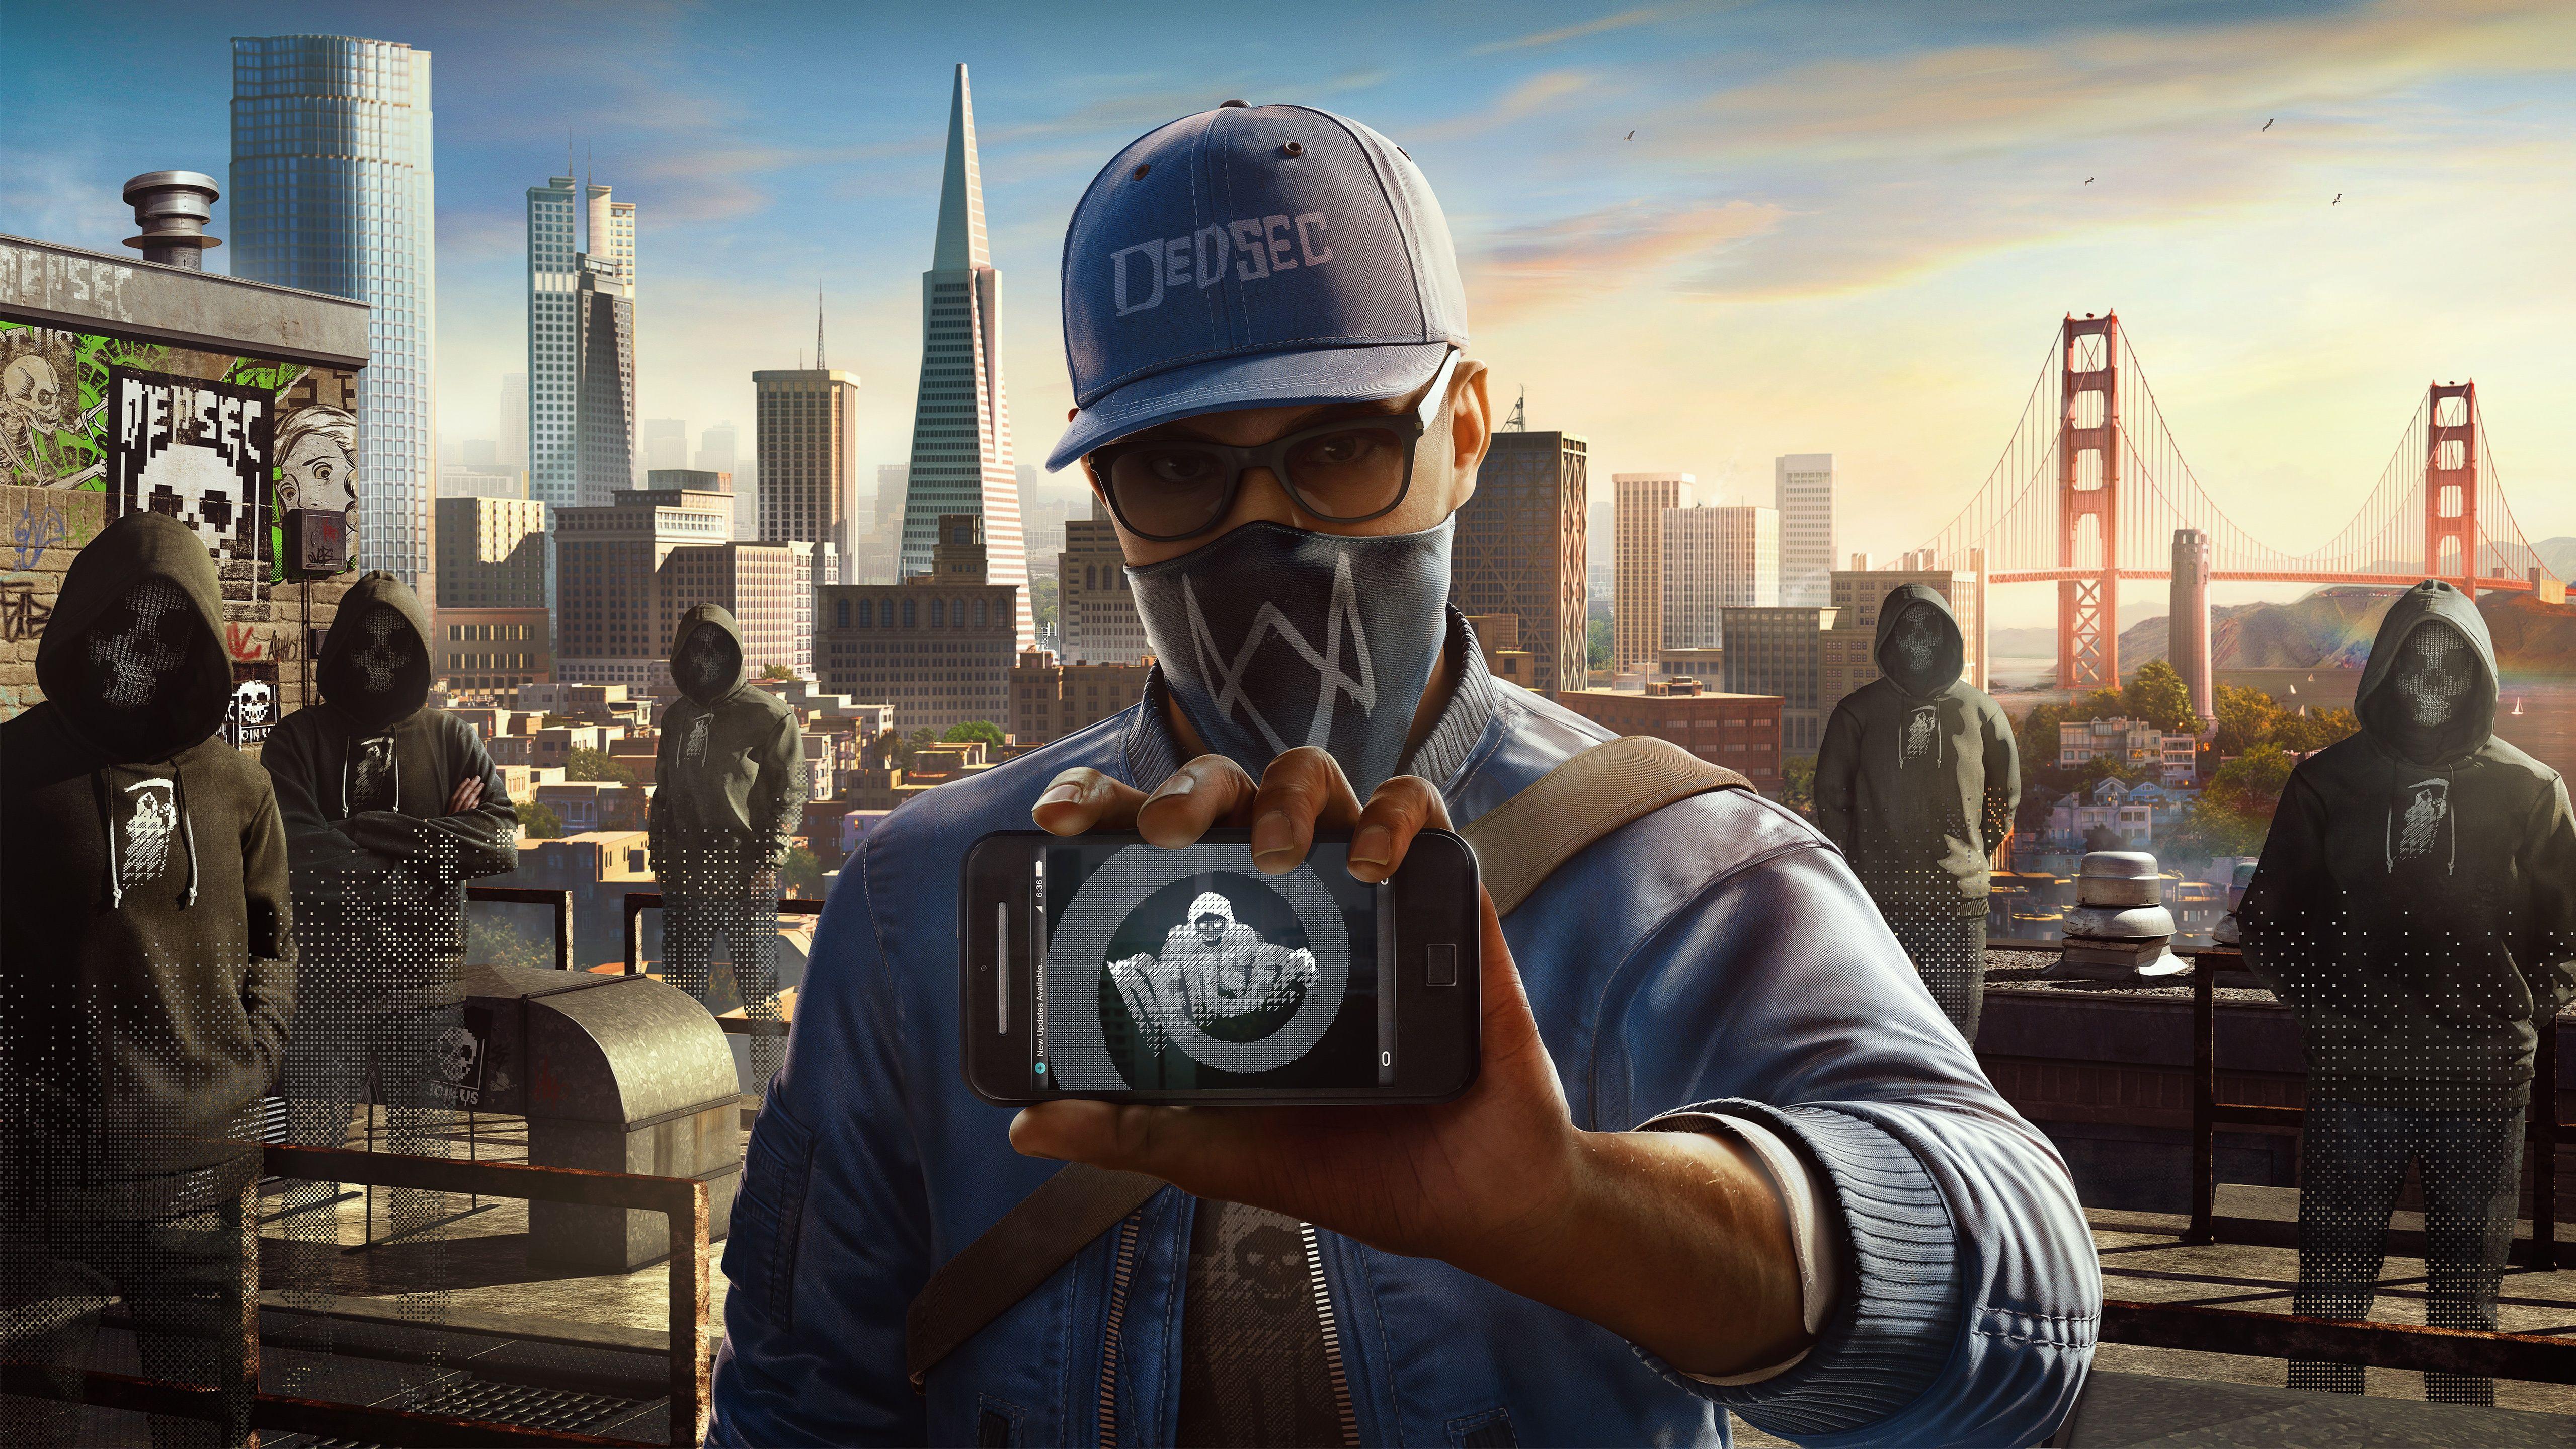 Watch Dogs ctOS iPhone wallpaper by reeses on DeviantArt